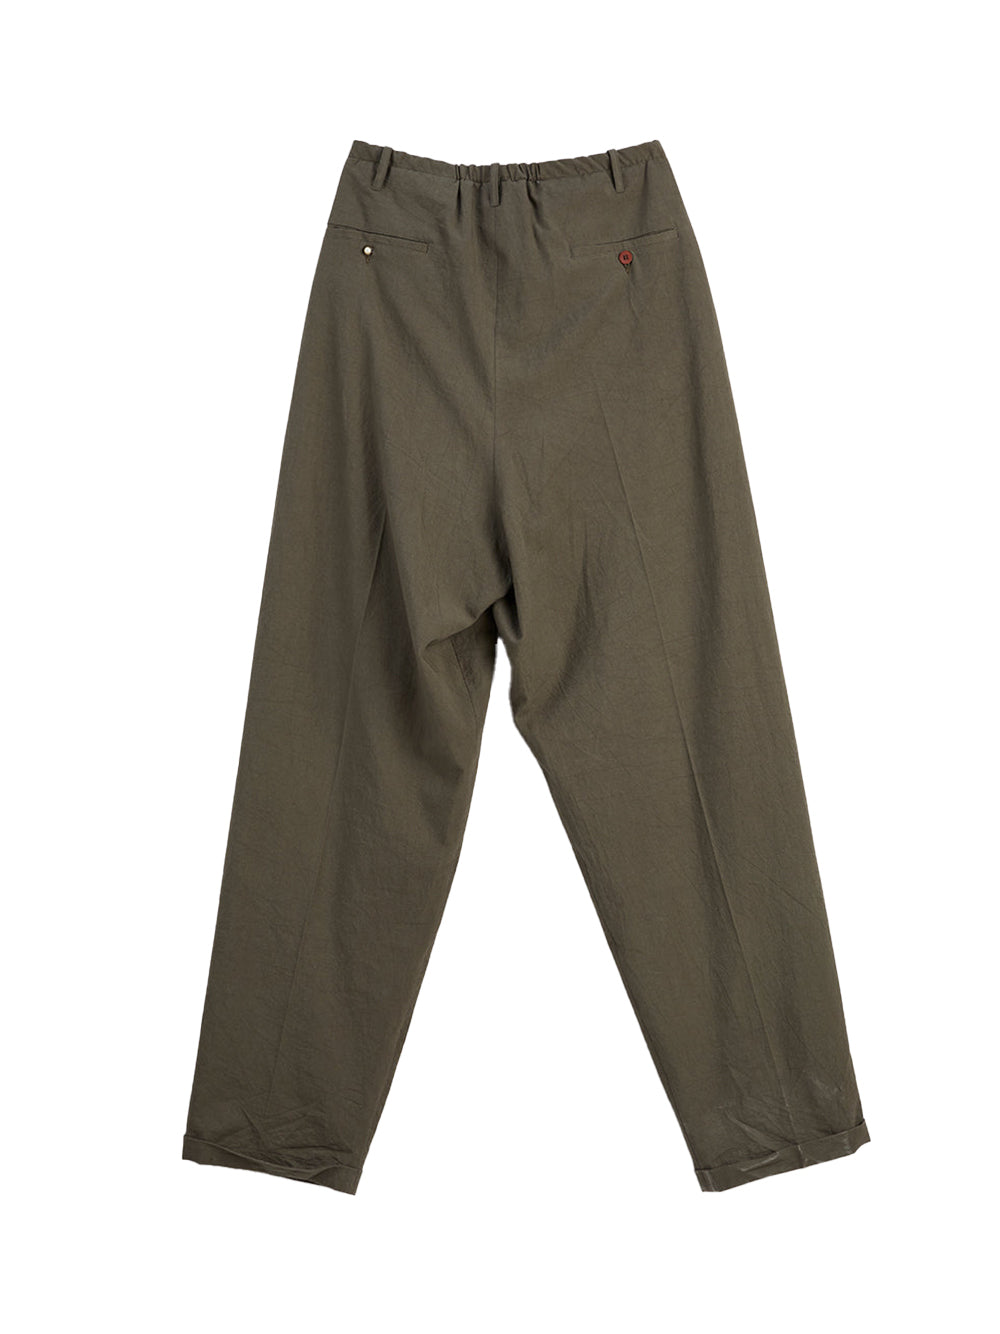 New Peoples` Trousers